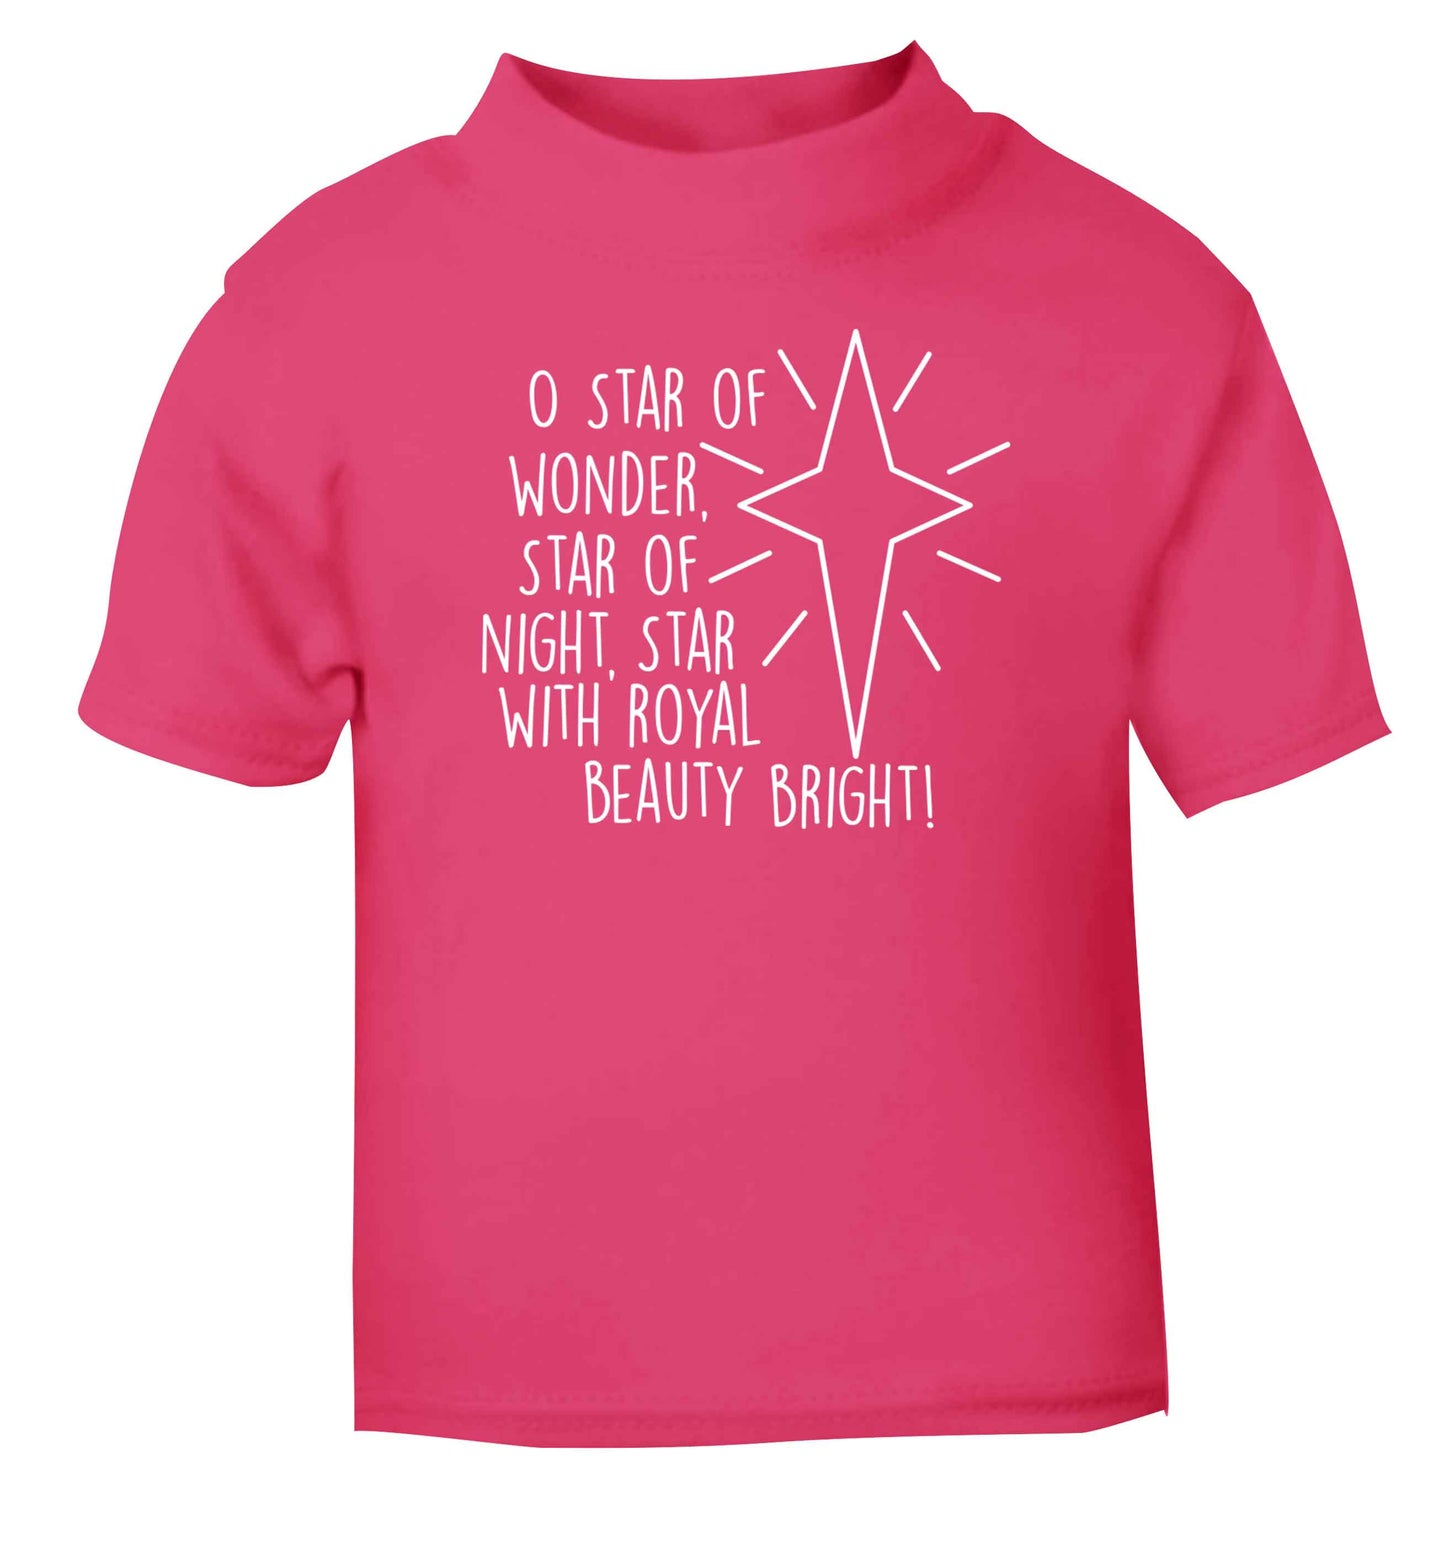 Oh star of wonder star of night, star with royal beauty bright pink baby toddler Tshirt 2 Years